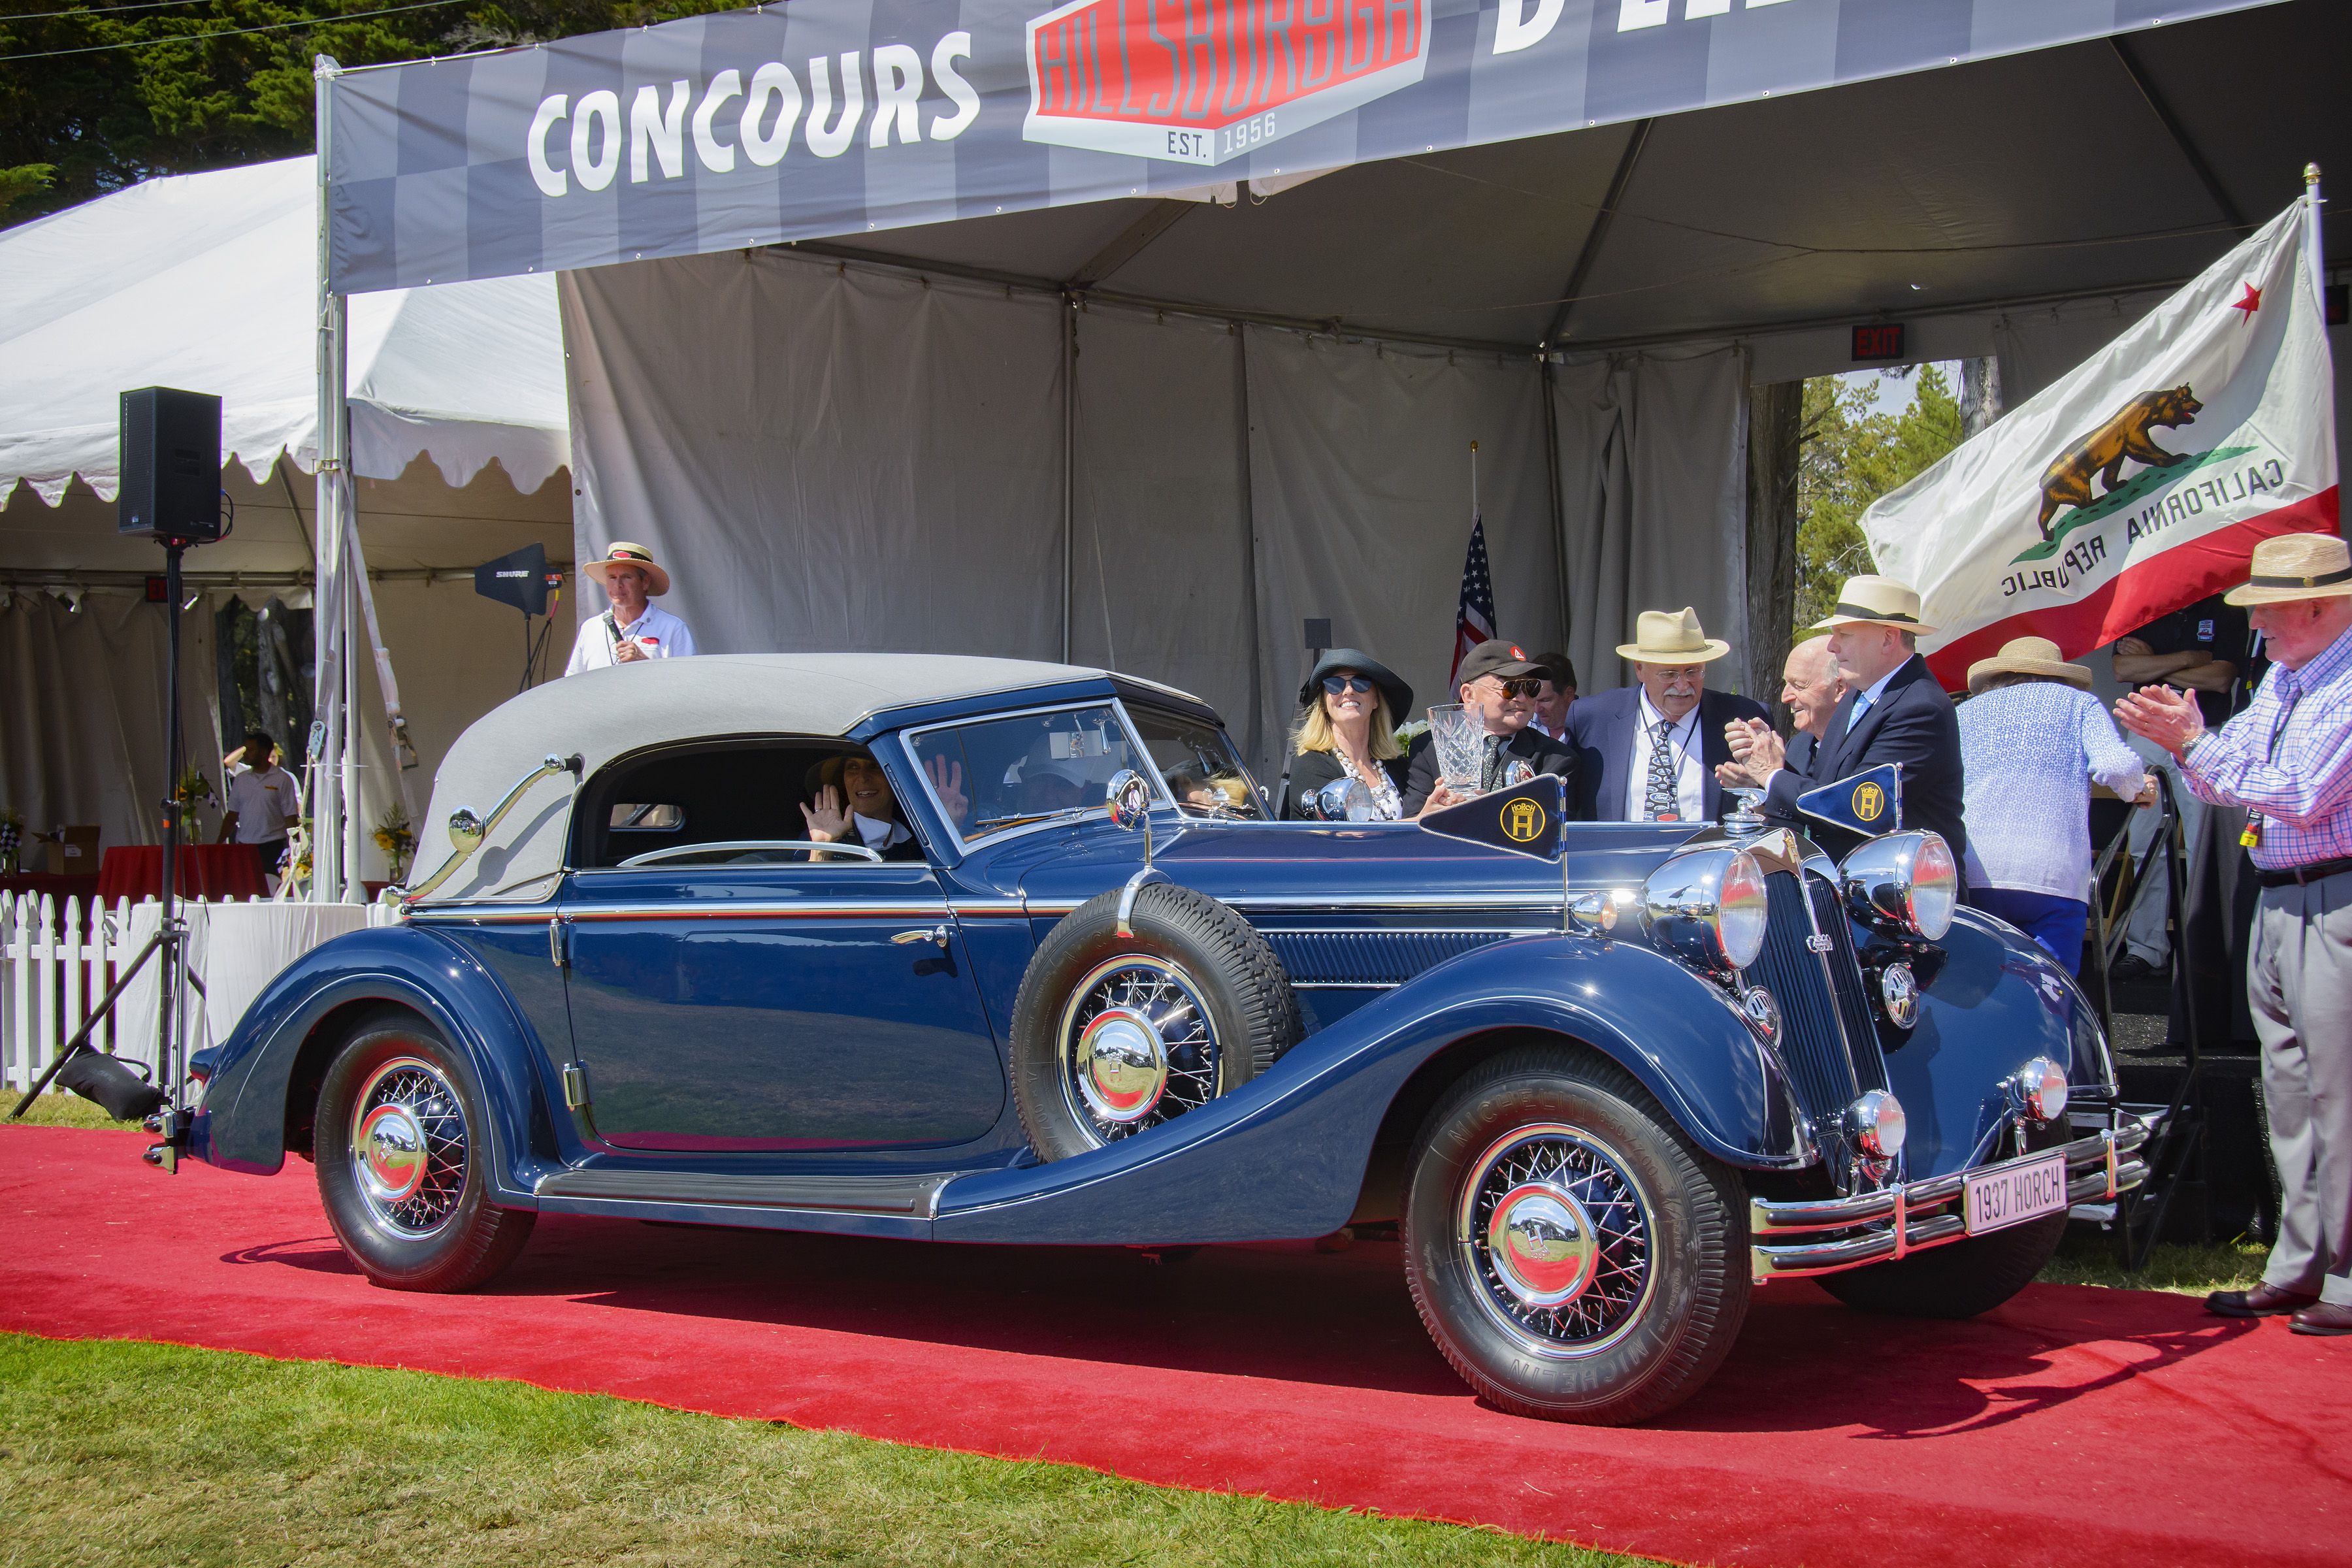 Why Does This Horch 853 Sports Cabriolet Keep Winning Everything?